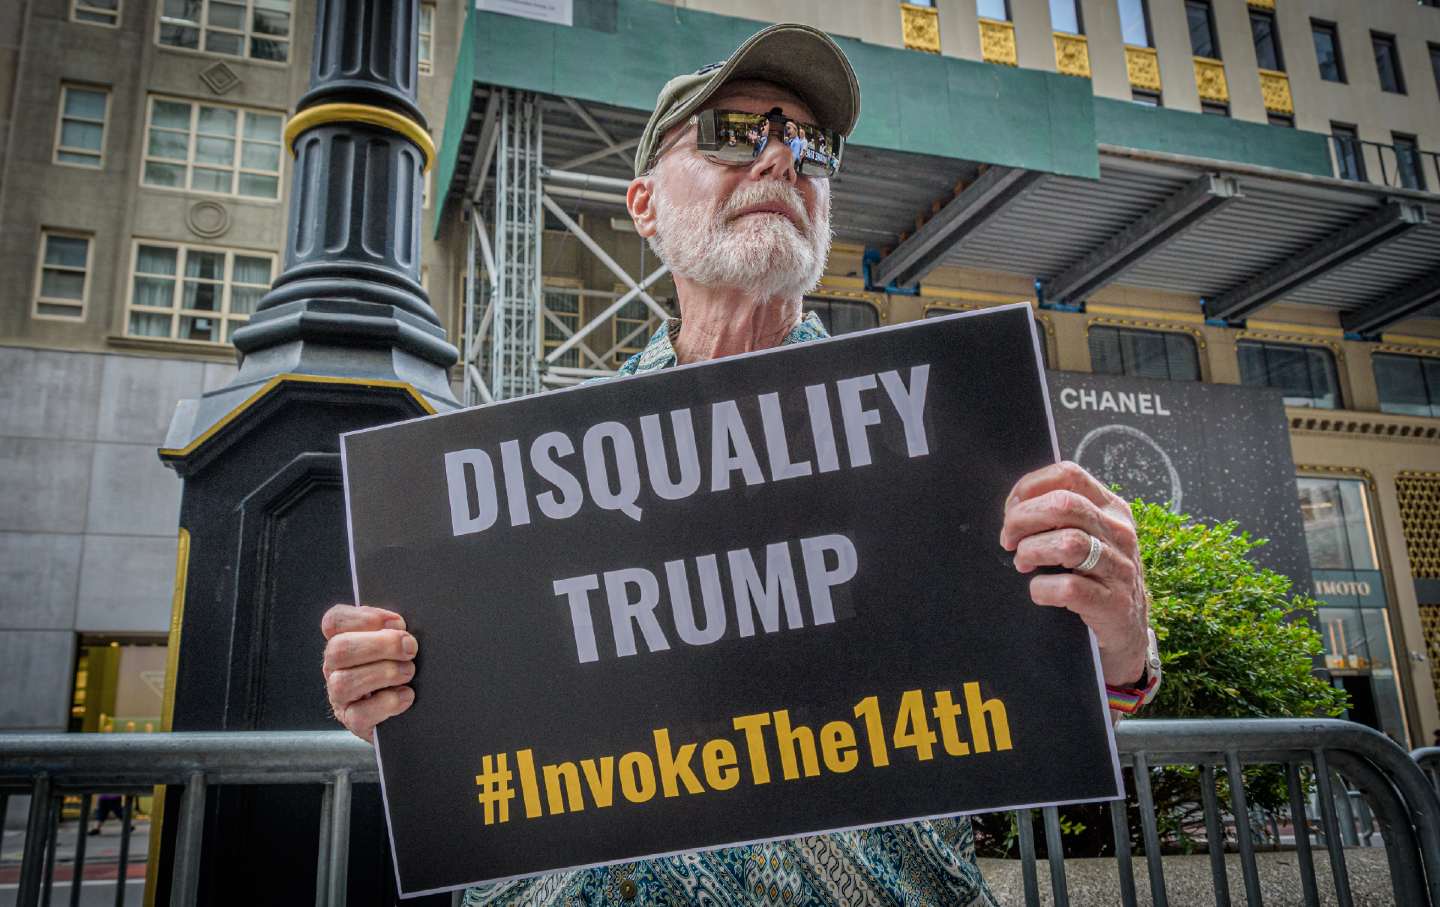 A protester stands outside Trump Tower in Manhattan demanding that state governments disqualify former president Trump from appearing on ballots in 2024 under the 14th Amendment.